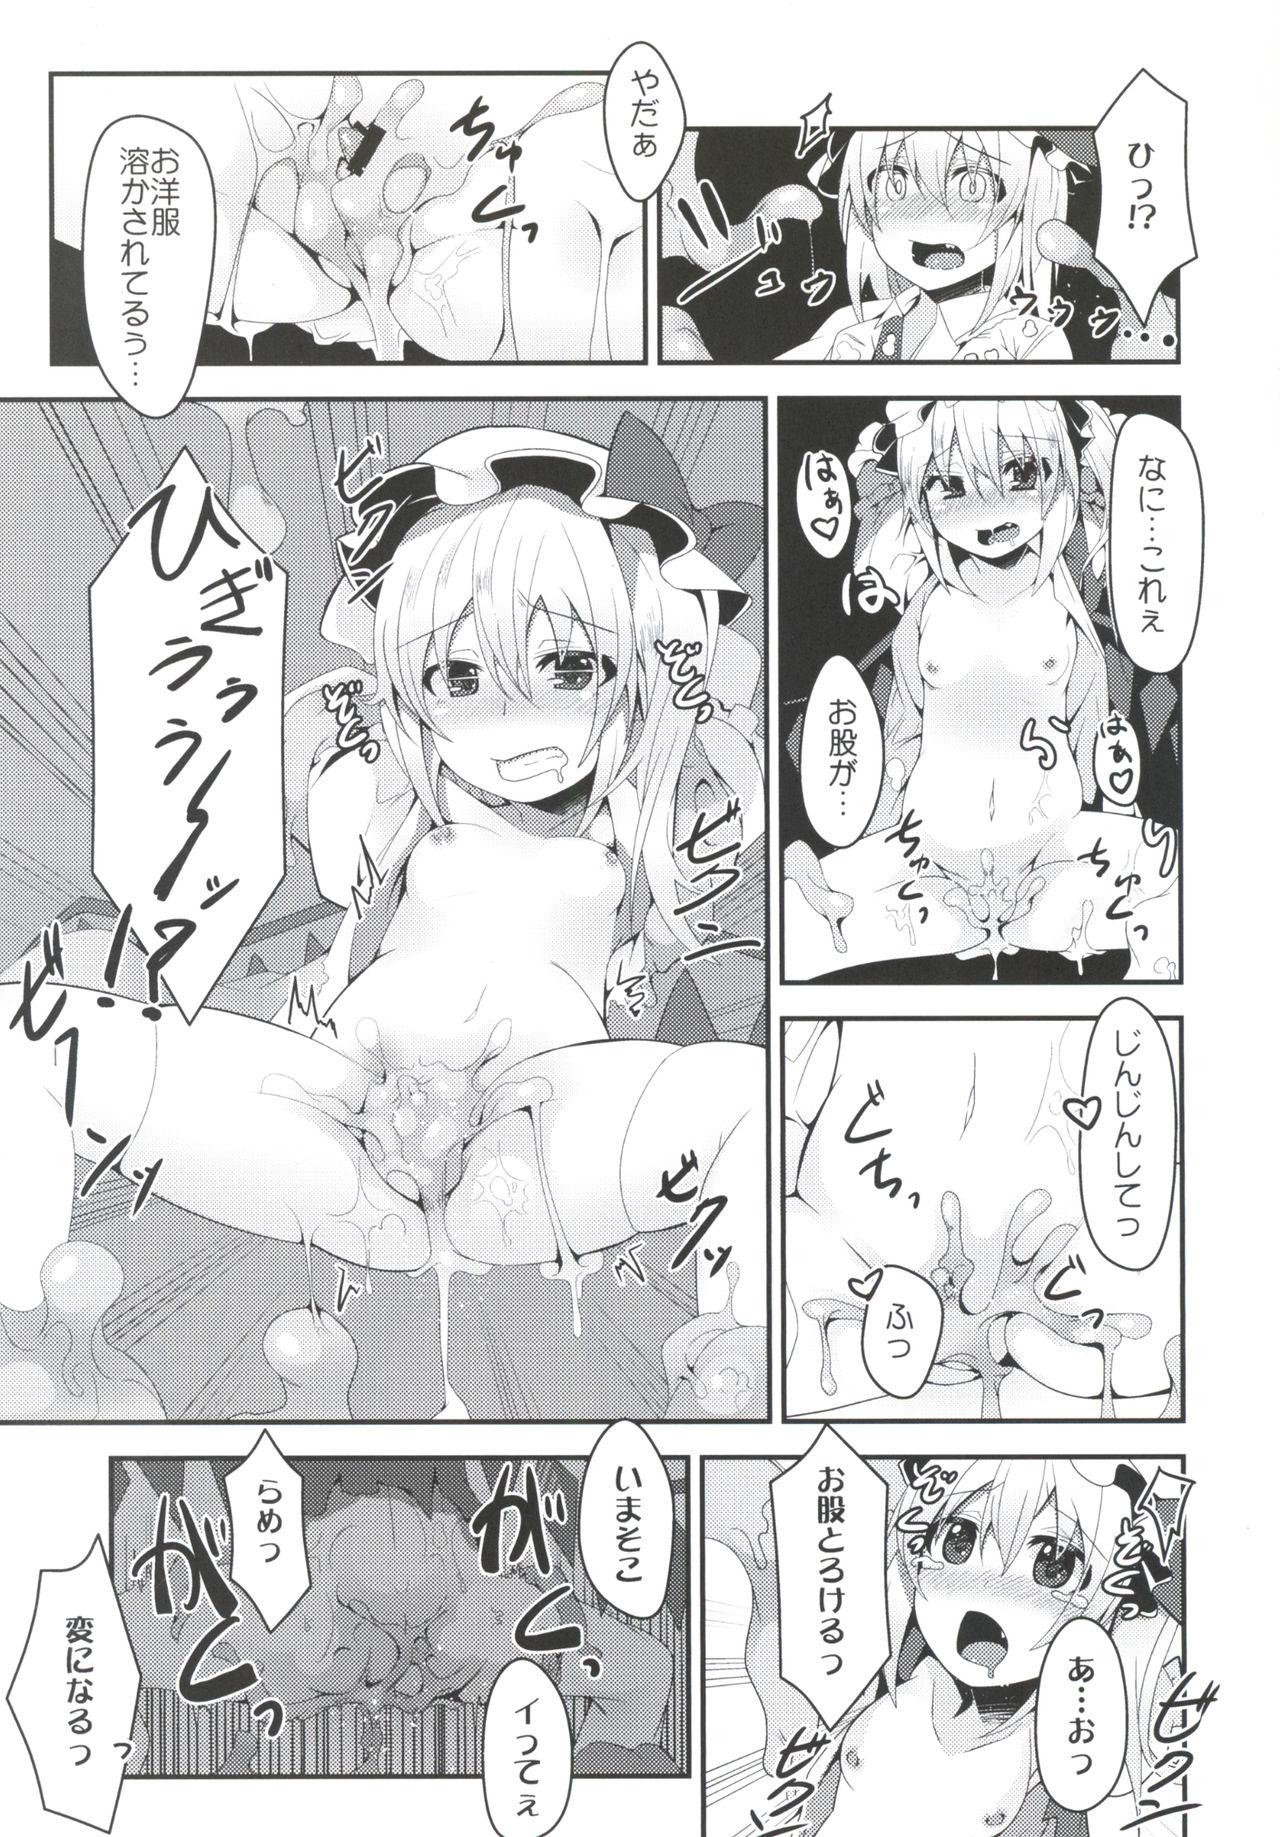 Milfporn Flan-chan no Ero Trap Dungeon - Touhou project Ass Sex - Page 6